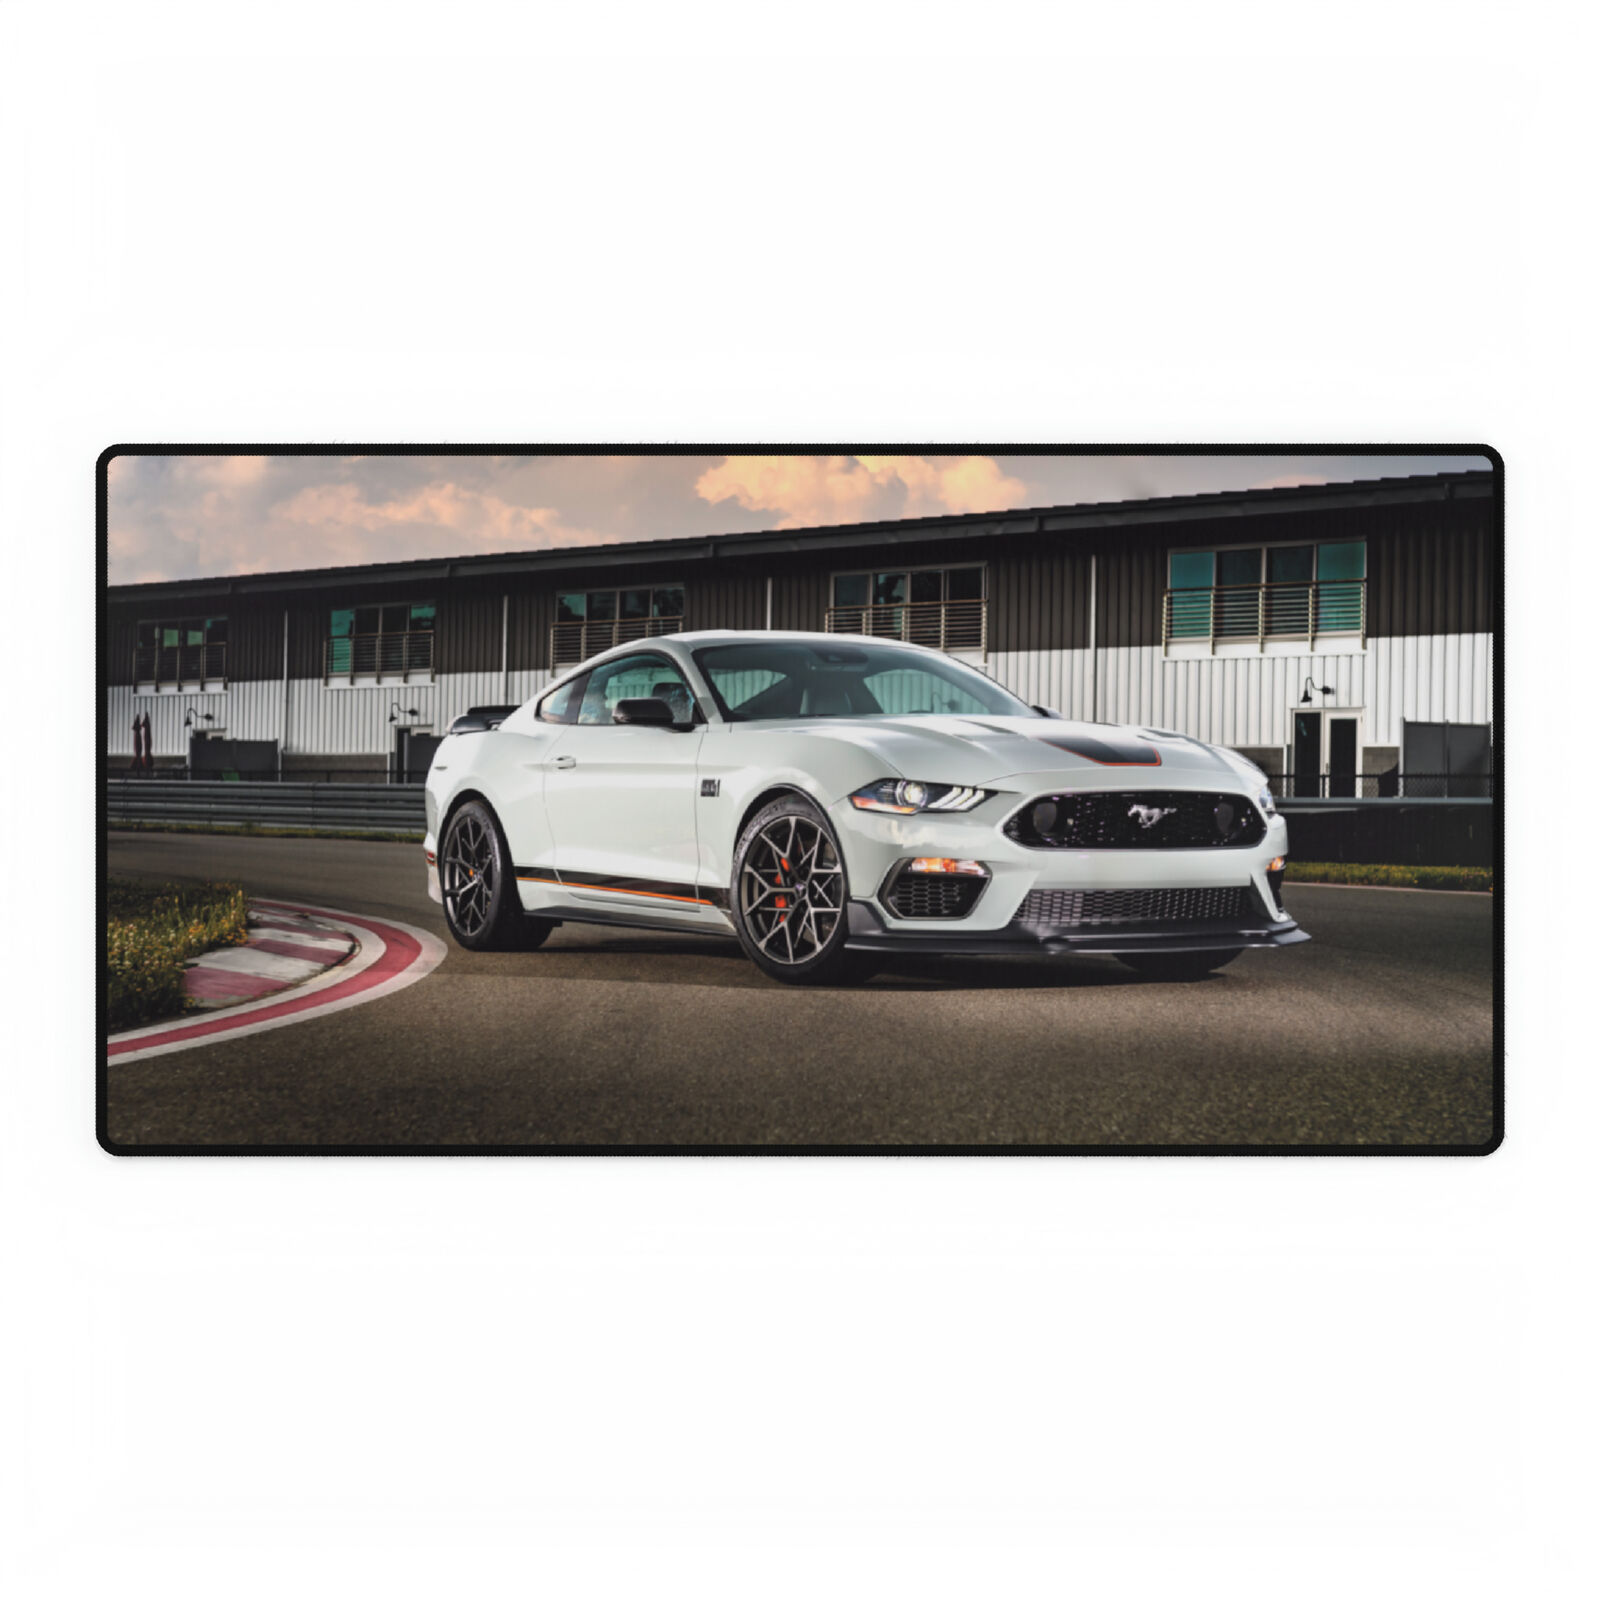 2021 Ford Mustang Mach 1 - High Quality - Large Desk Mat Mouse Pad